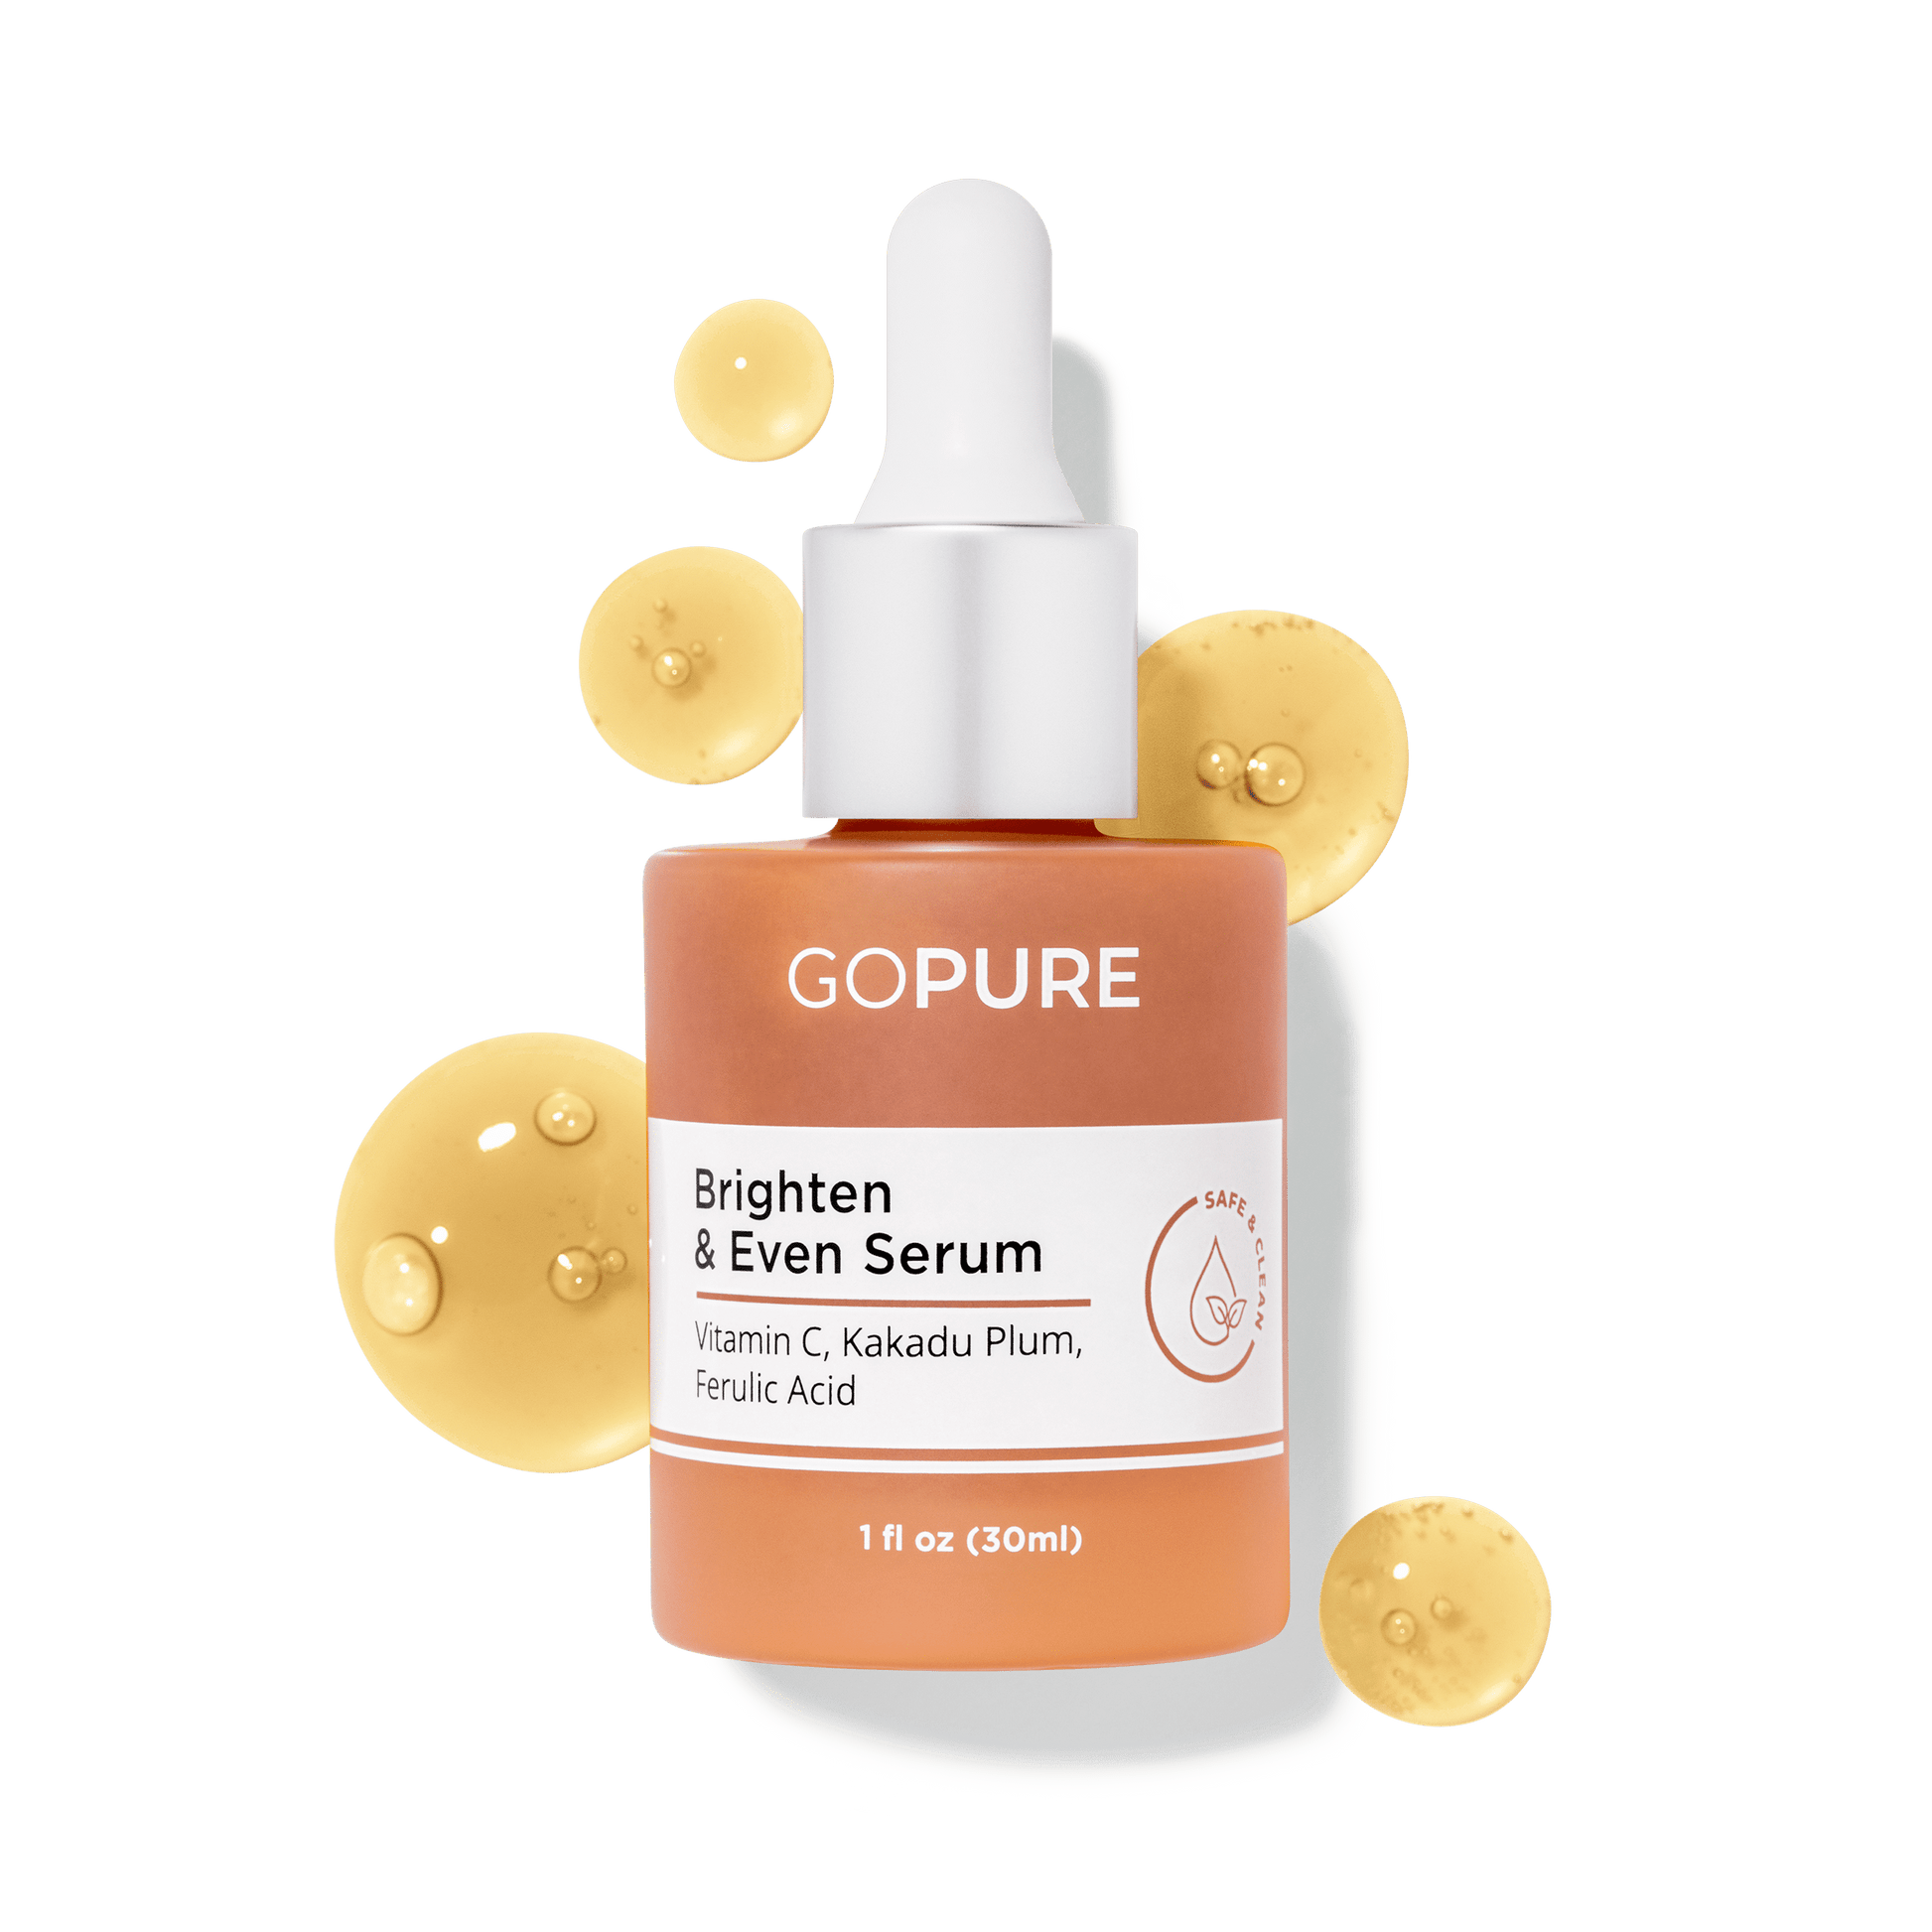 1 fl oz. Peach-colored bottle of GoPure Brighten & Even Serum with white dropper, surrounded by golden yellow serum droplets. Ingredients contain Vitamin C, Kakadu Plum and Ferulic Acid